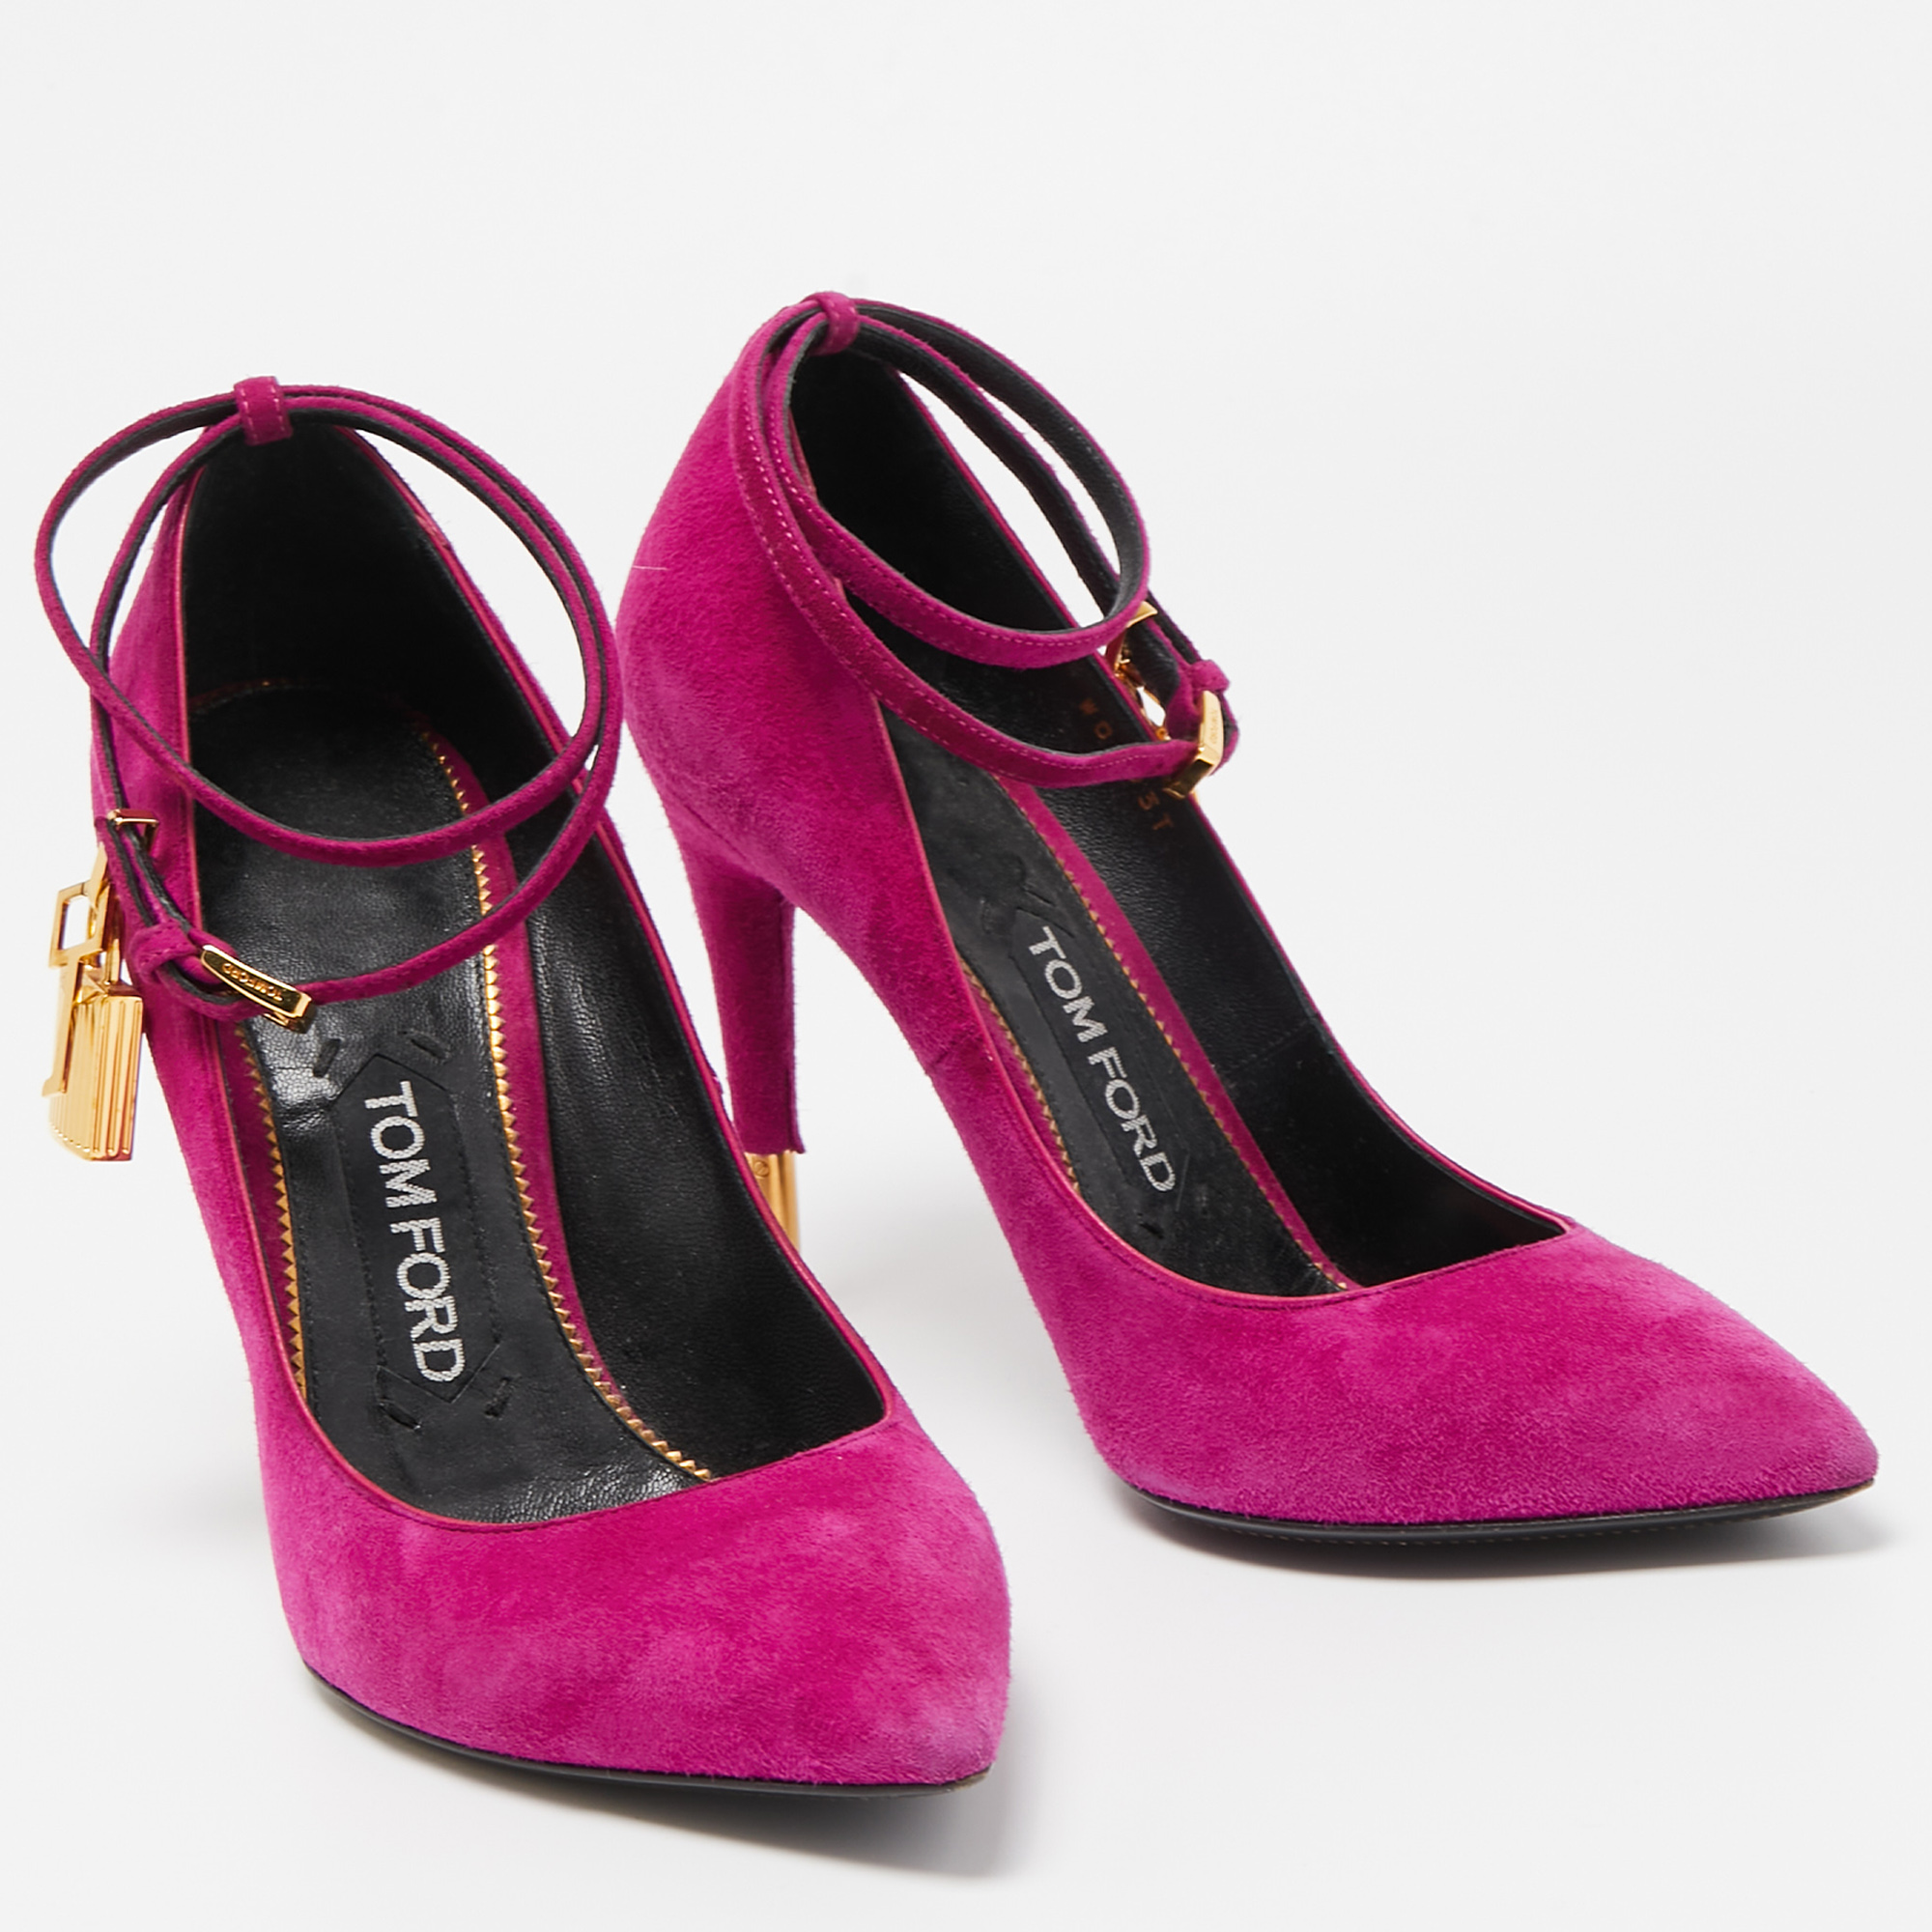 Tom Ford Purple Suede Pointed Toe Padlock Pumps Size 36.5